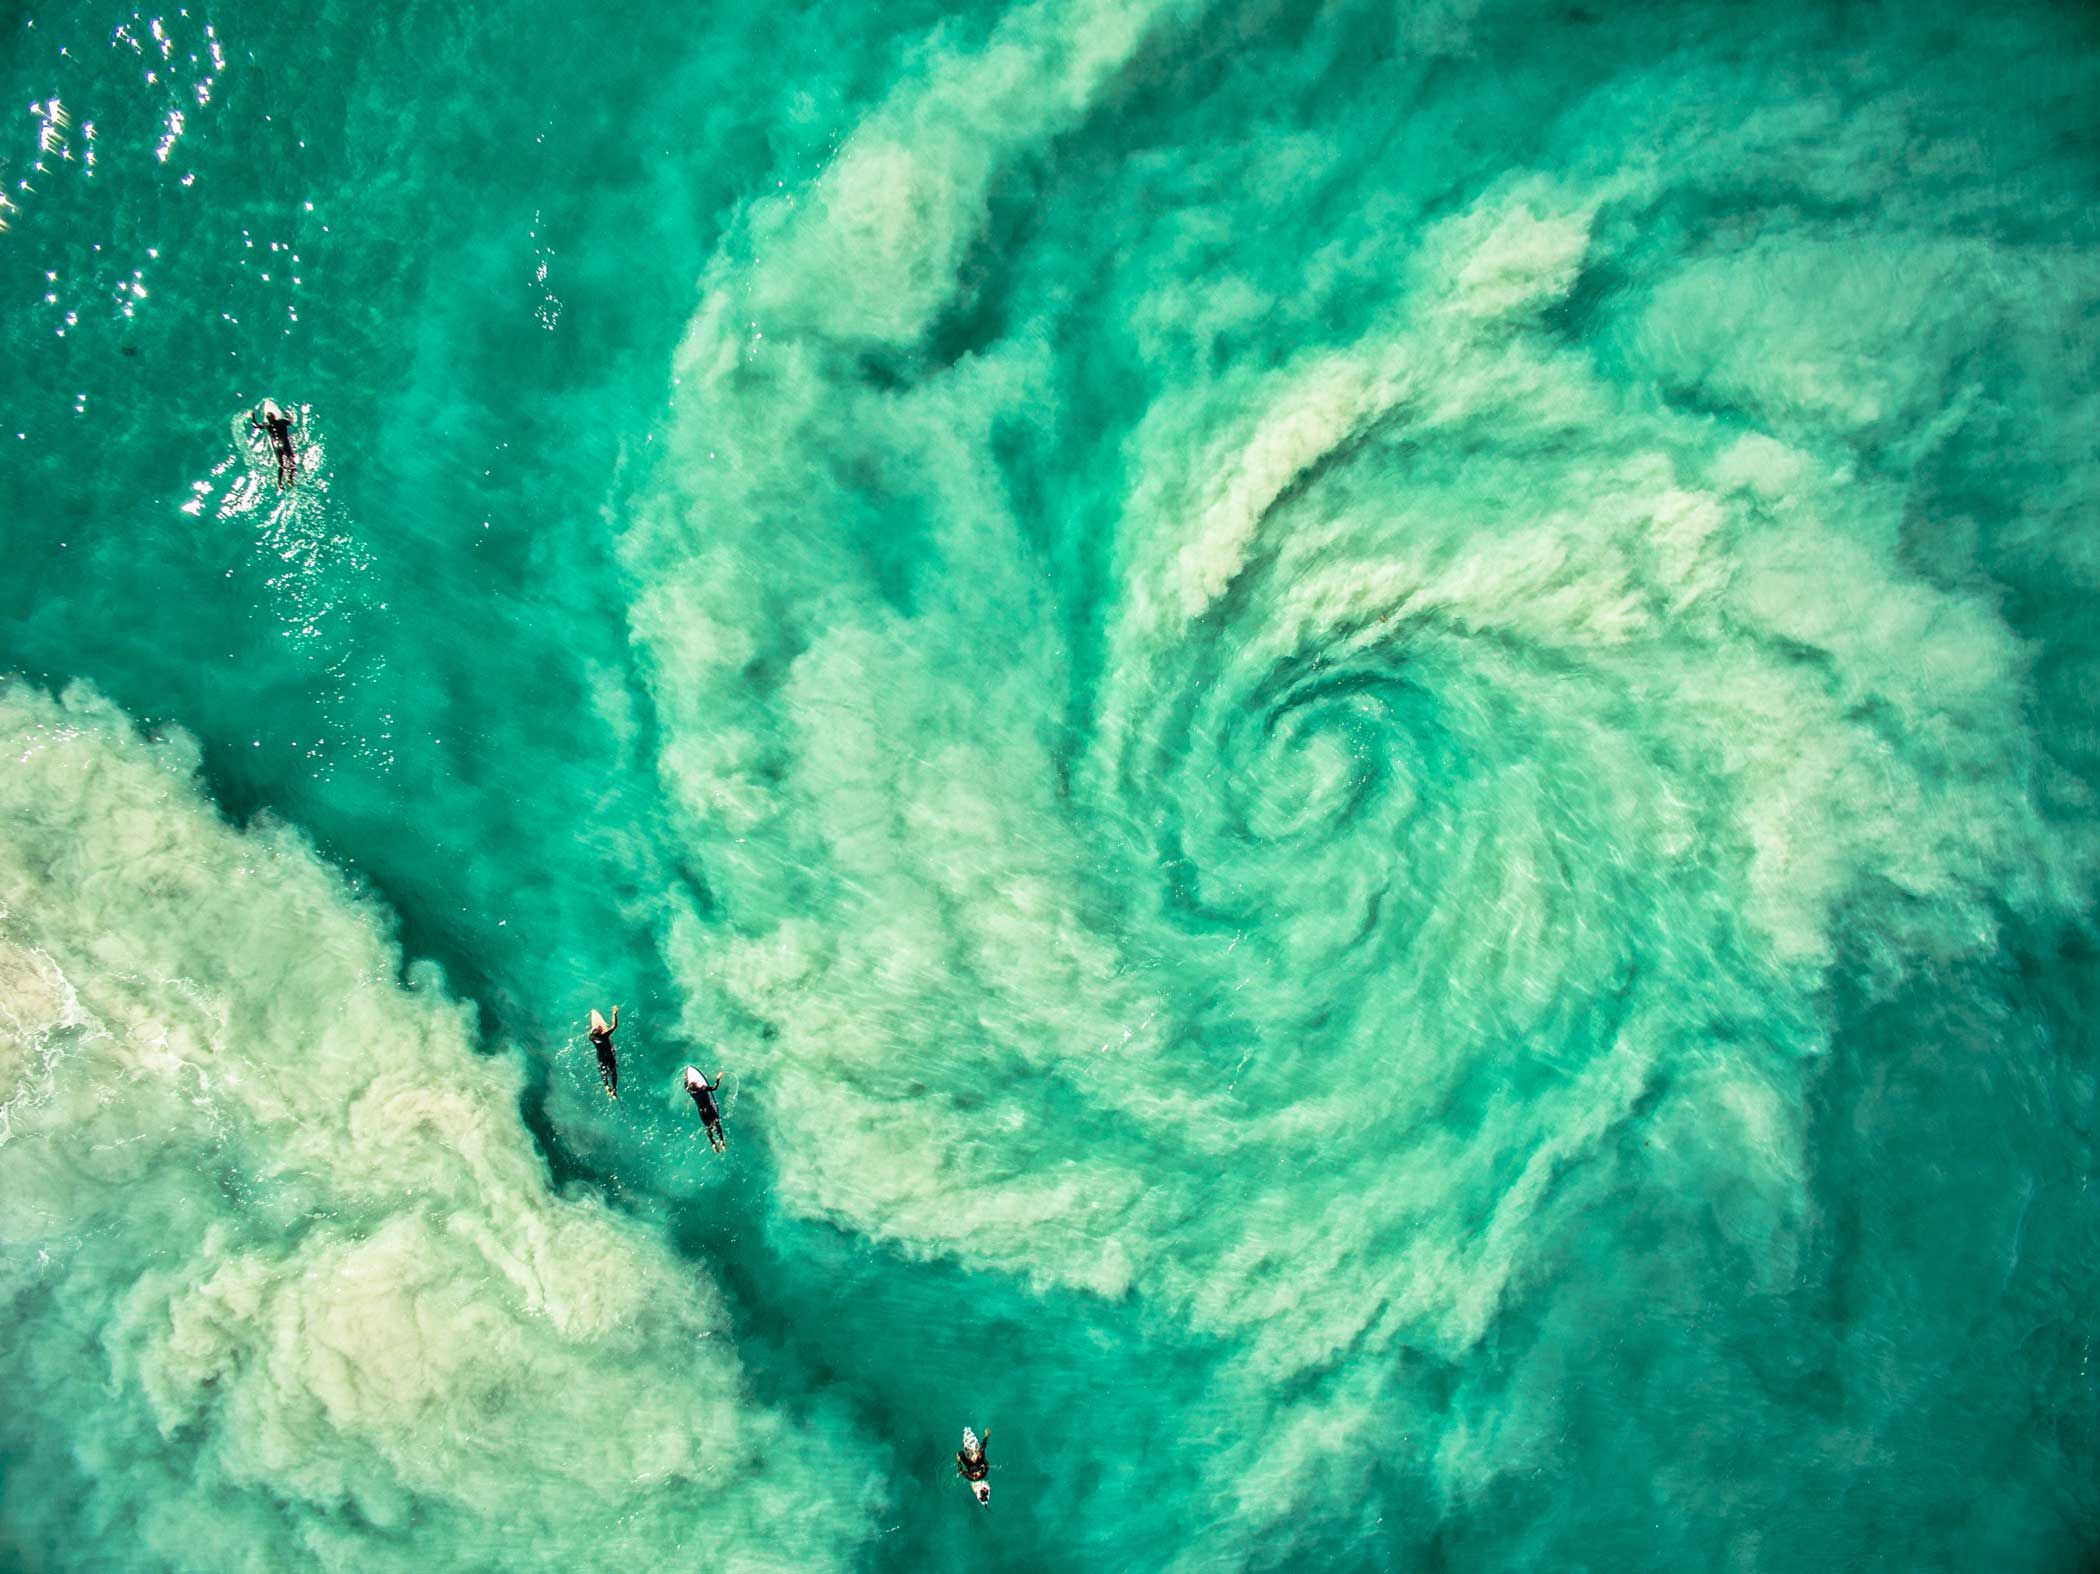 Earth From Above: Incredible Drone Photos